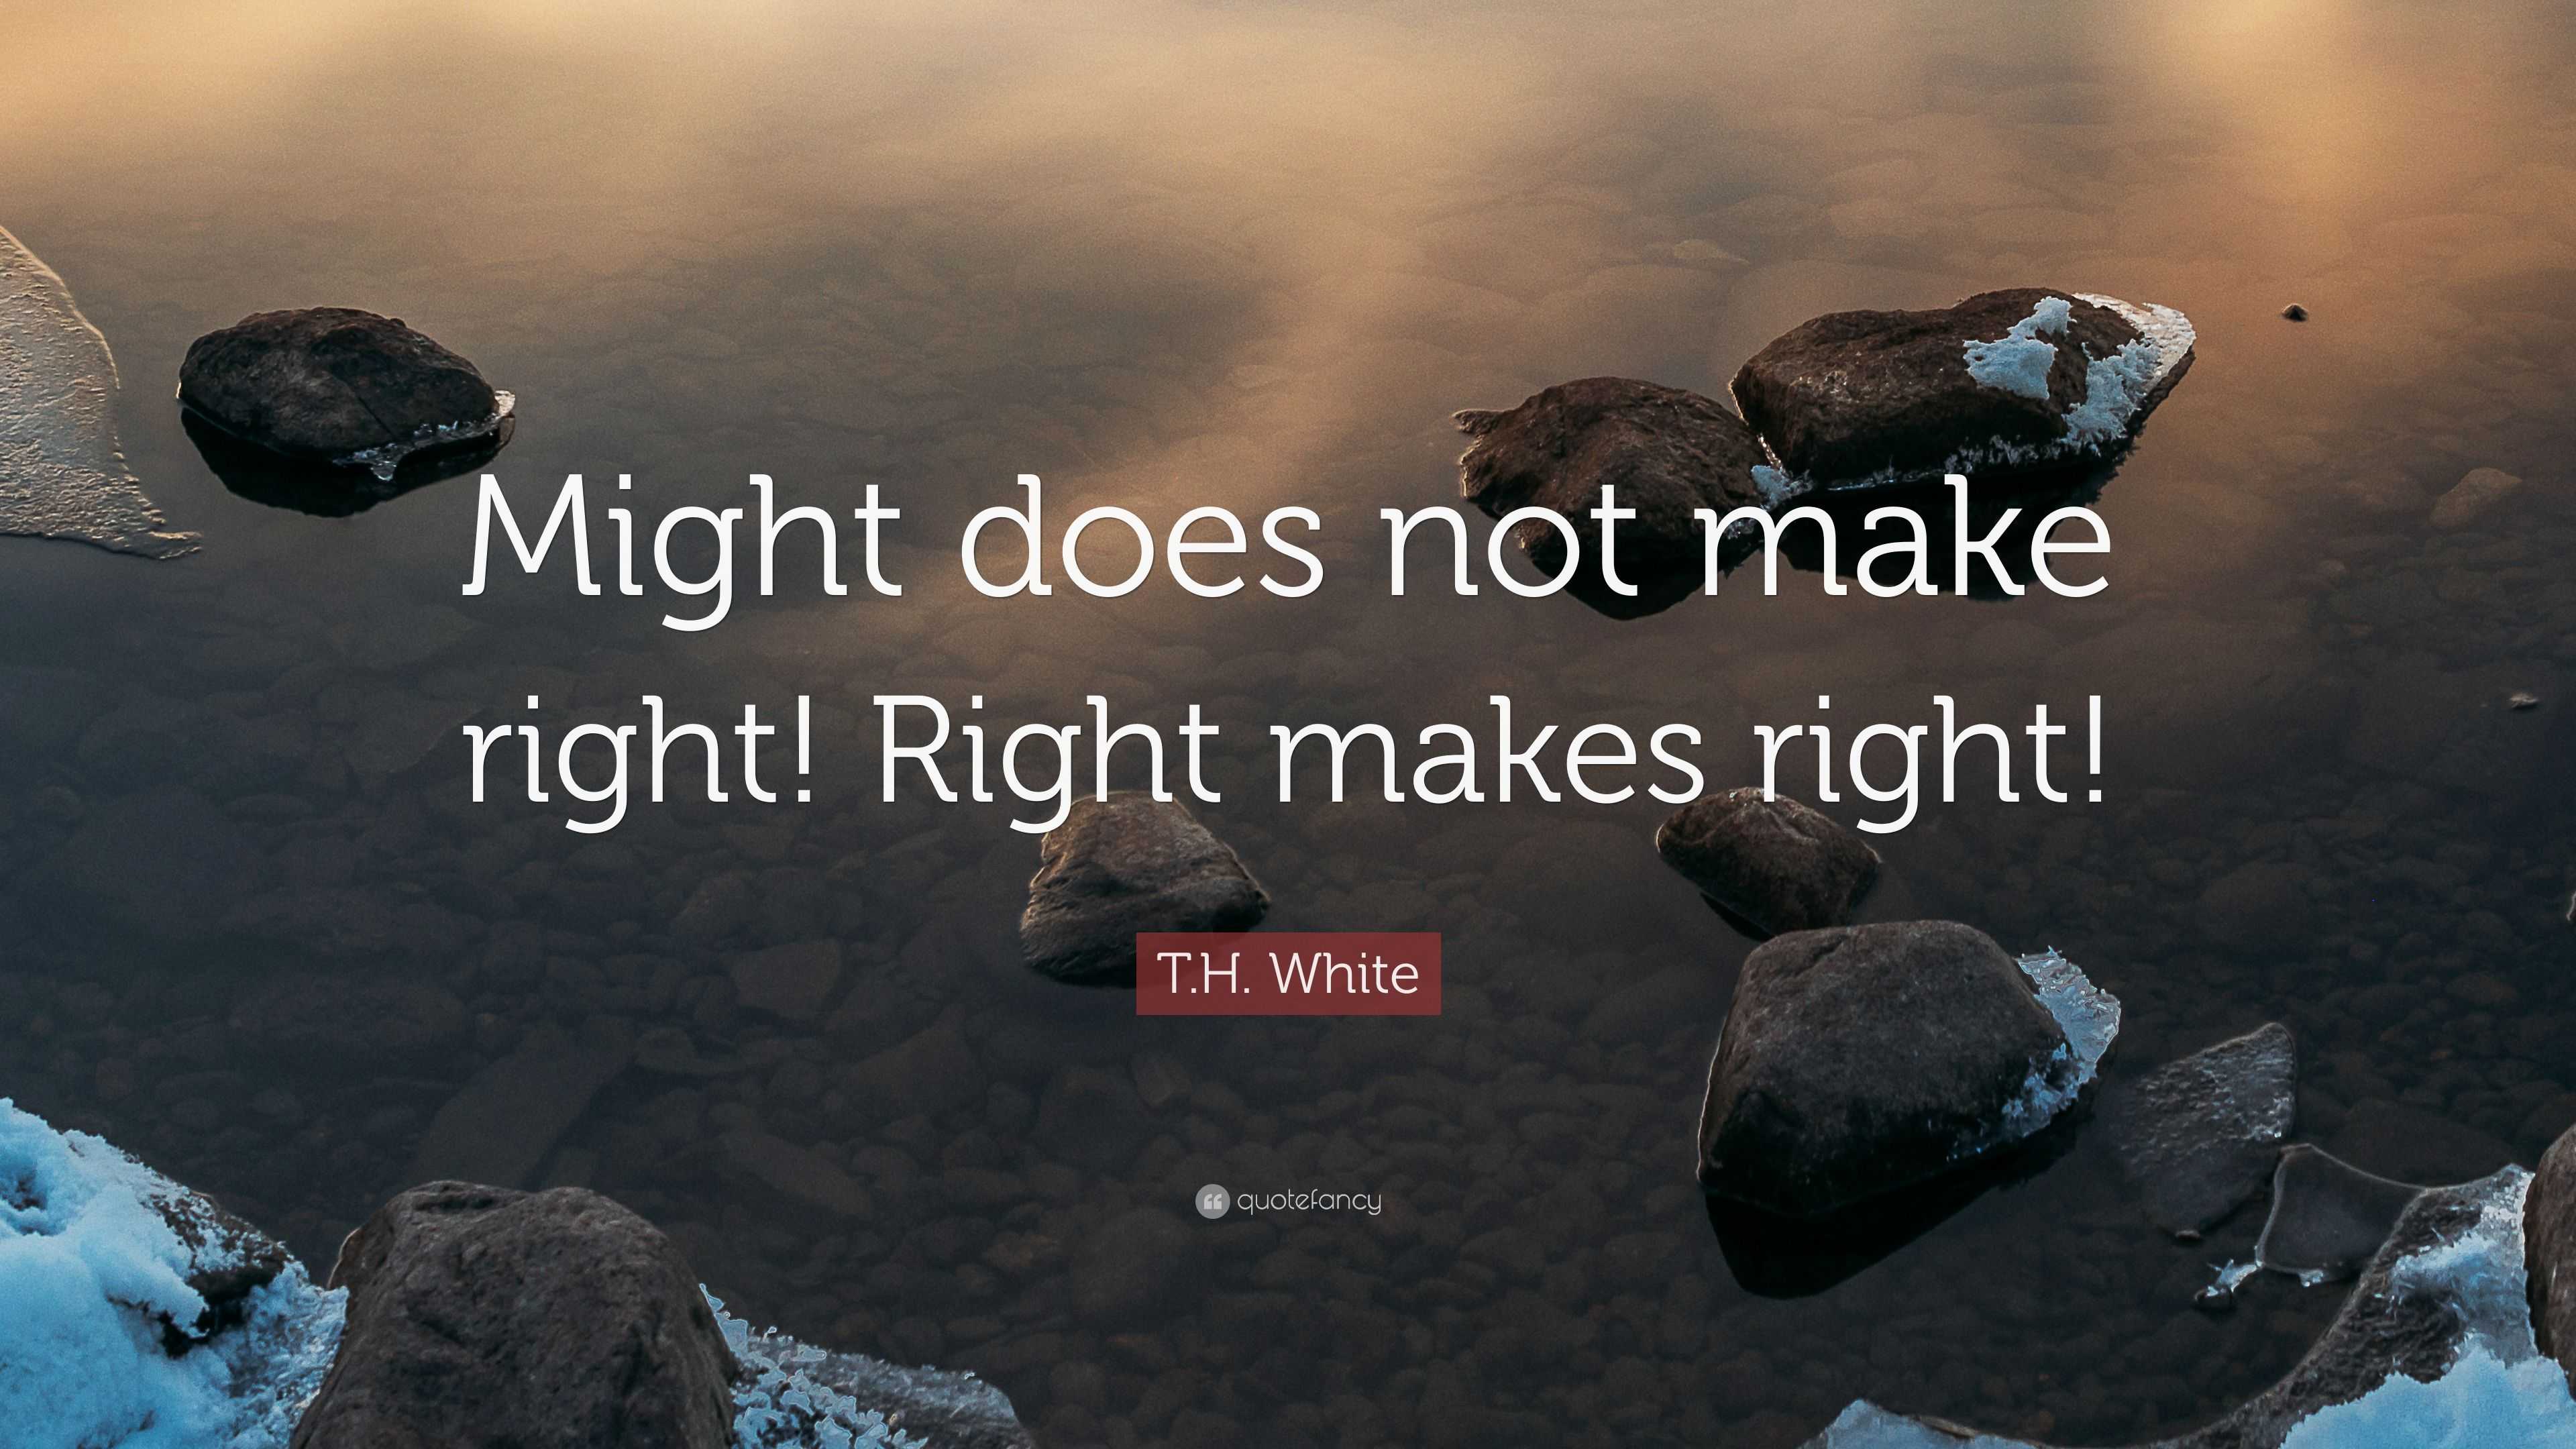 [Image: 5186780-T-H-White-Quote-Might-does-not-m...-right.jpg]